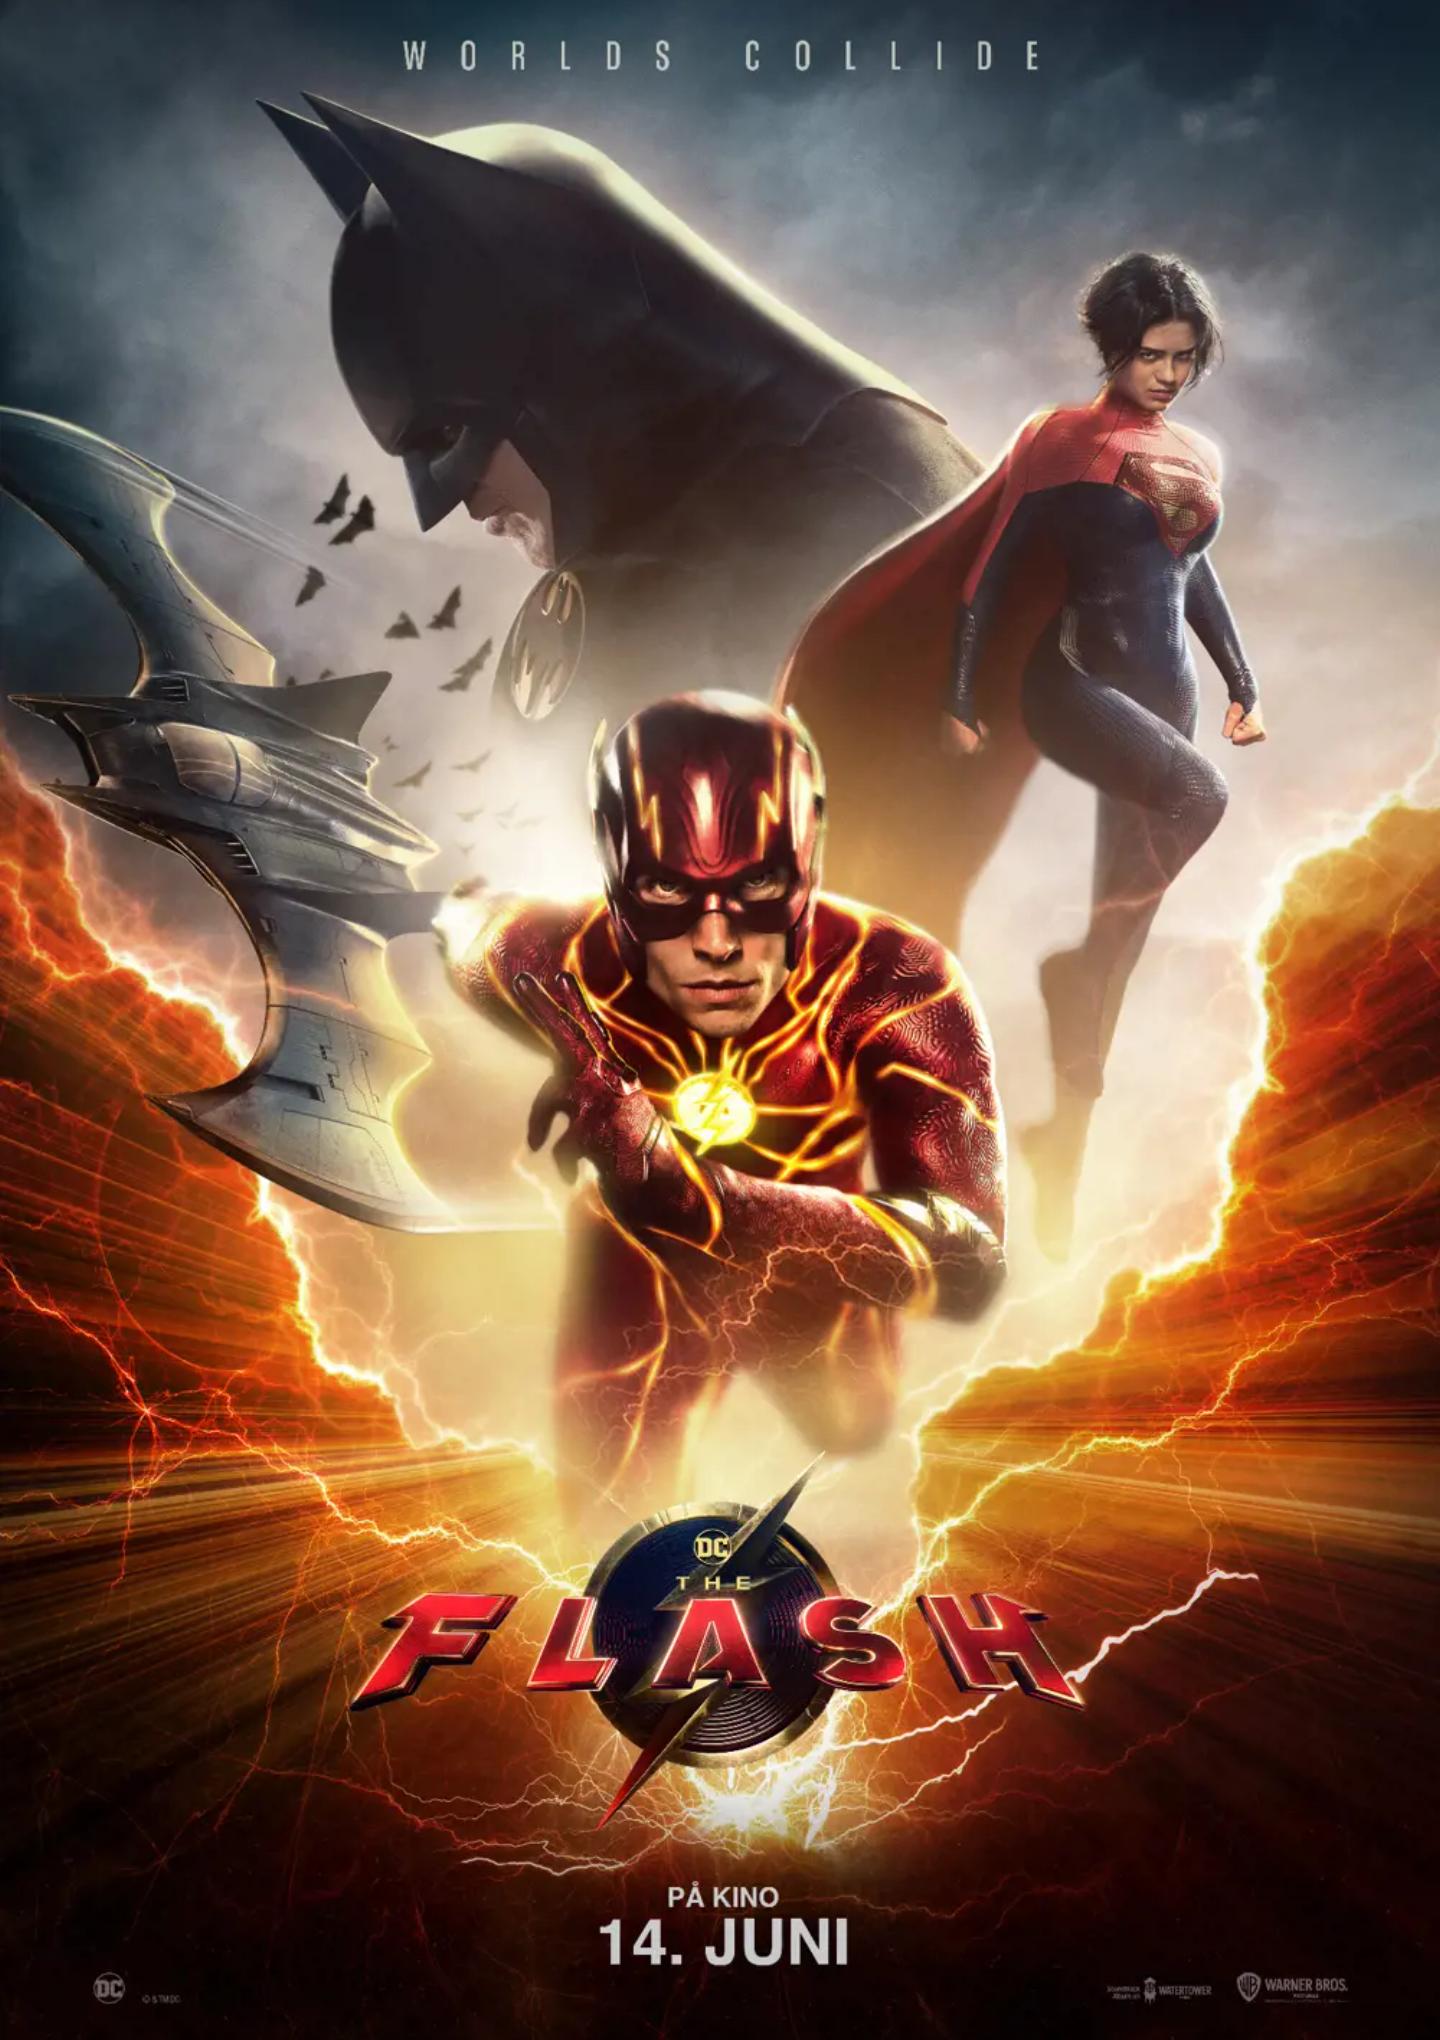 Plakat for 'The Flash'